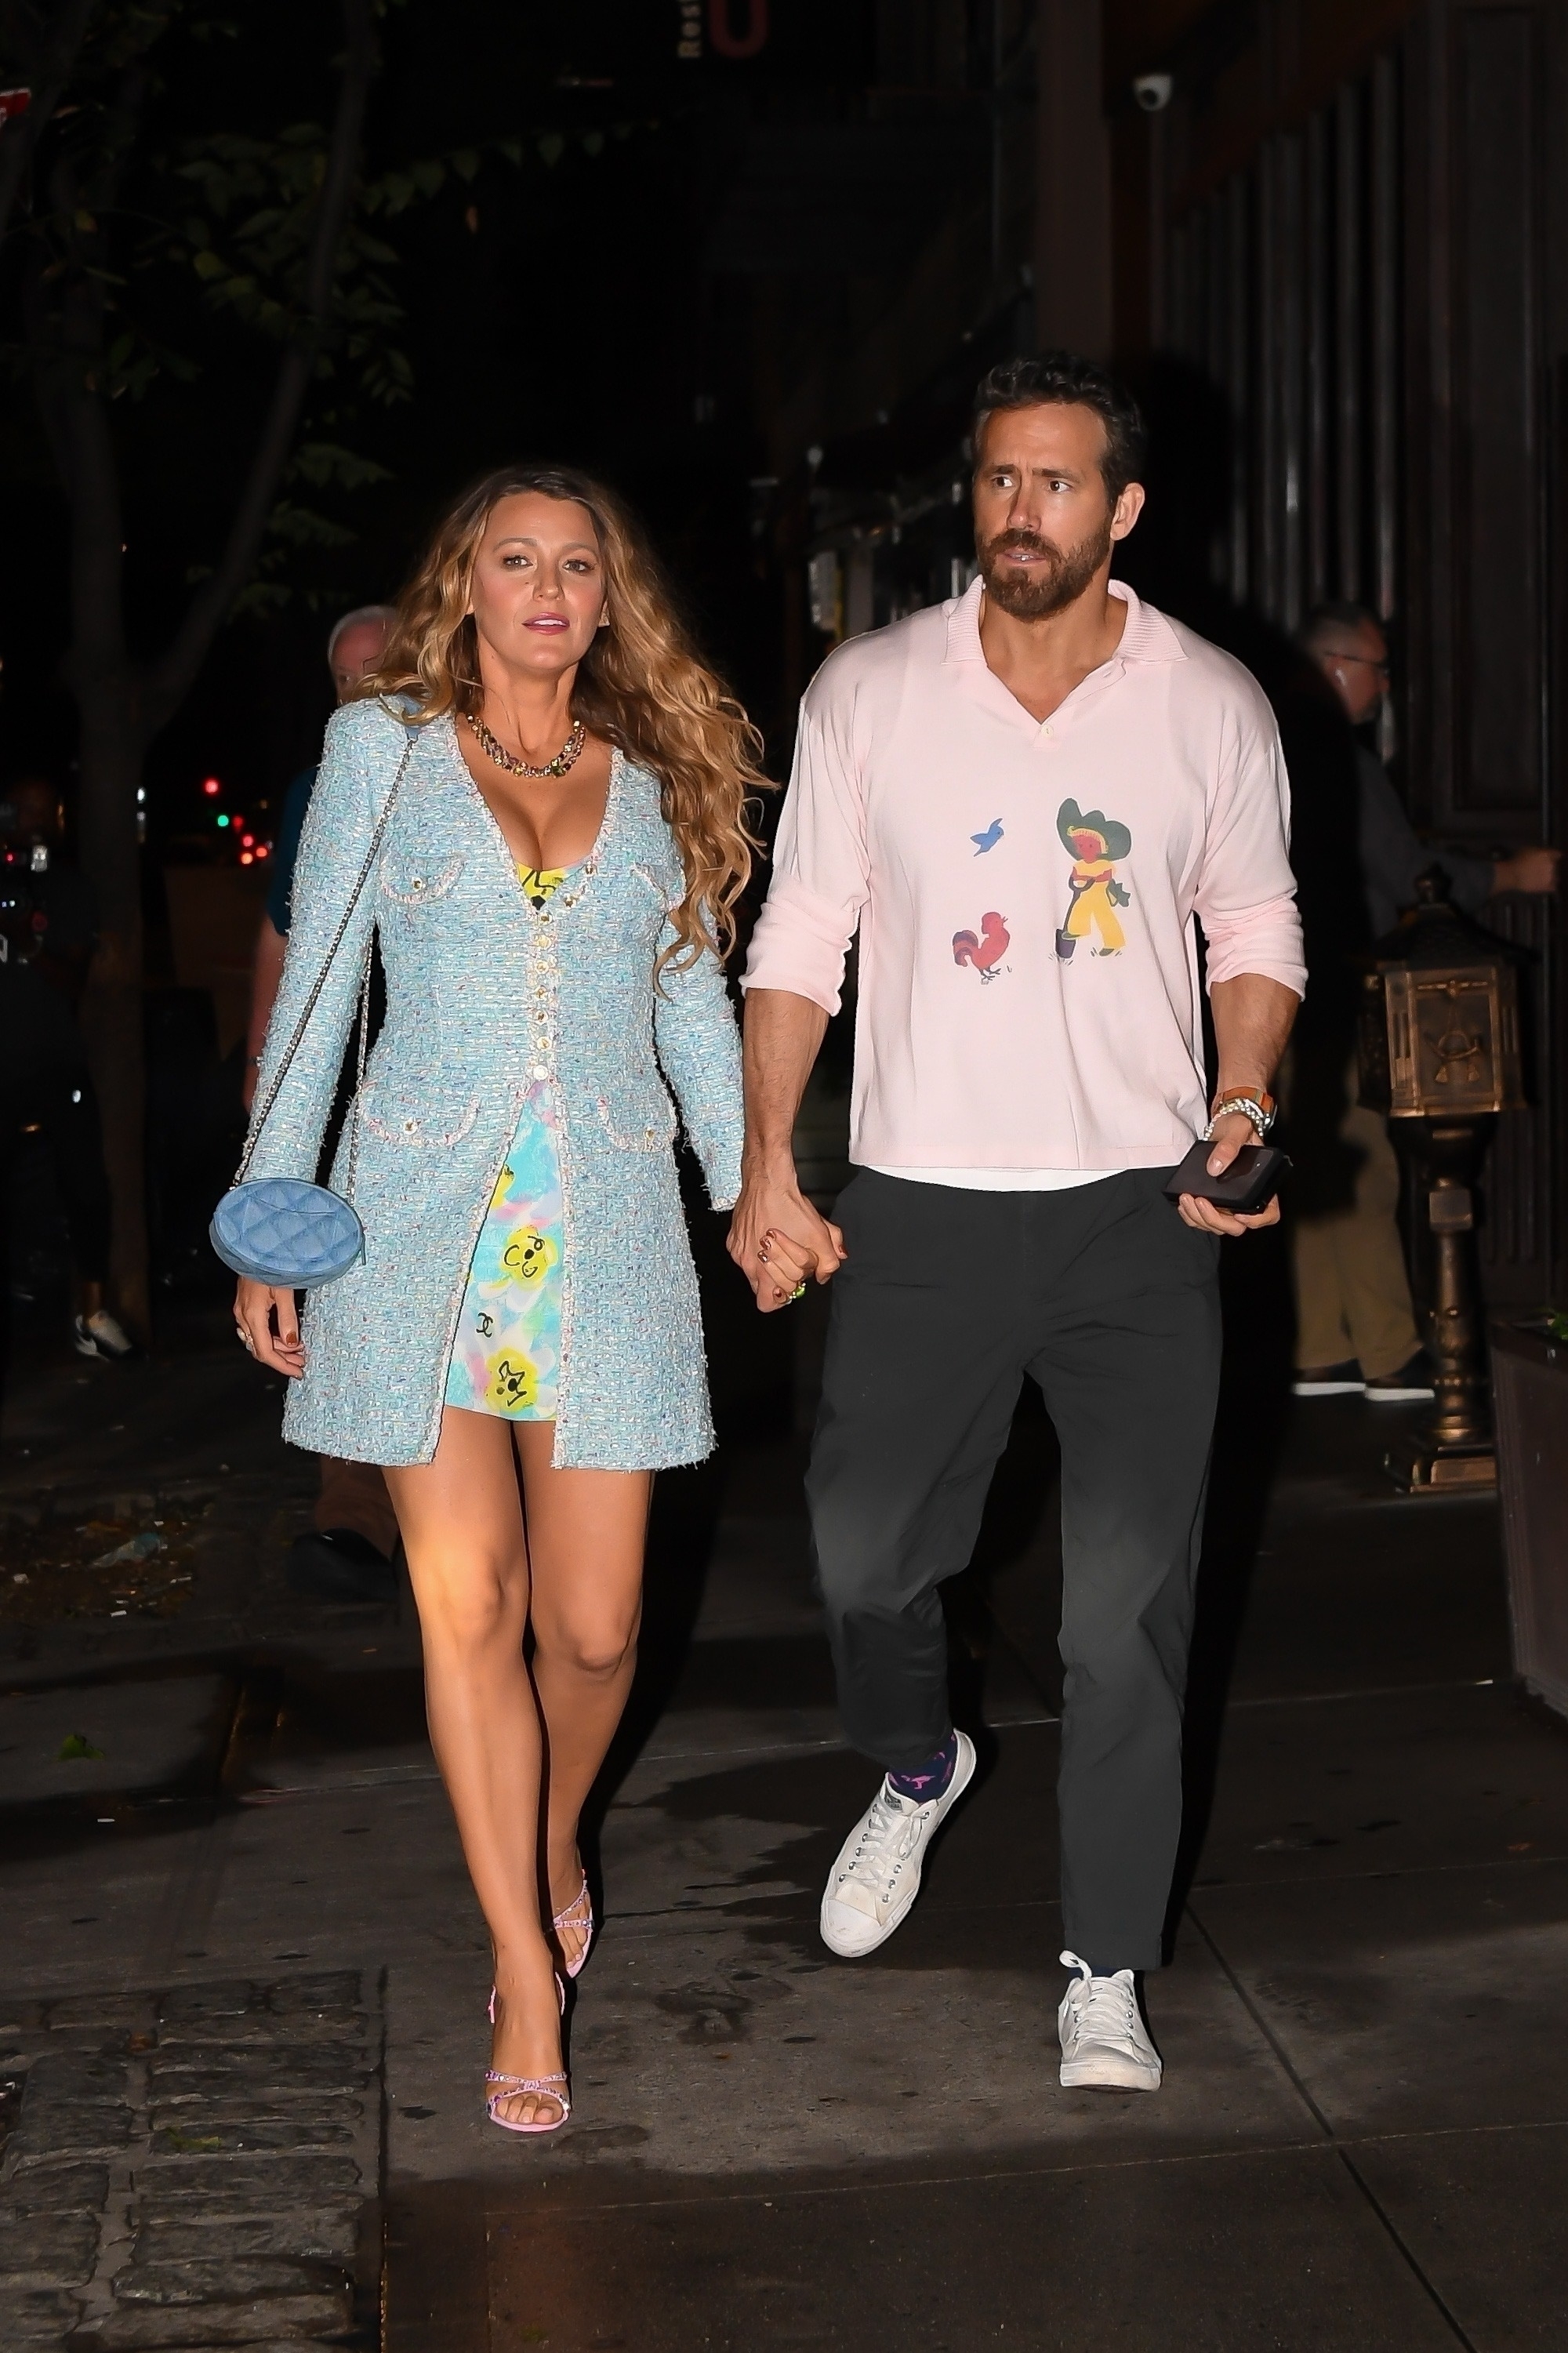 Ryan Reynolds & Blake Lively seen on a September 12 date in NYC wearing blue tweed & a cowboy shirt